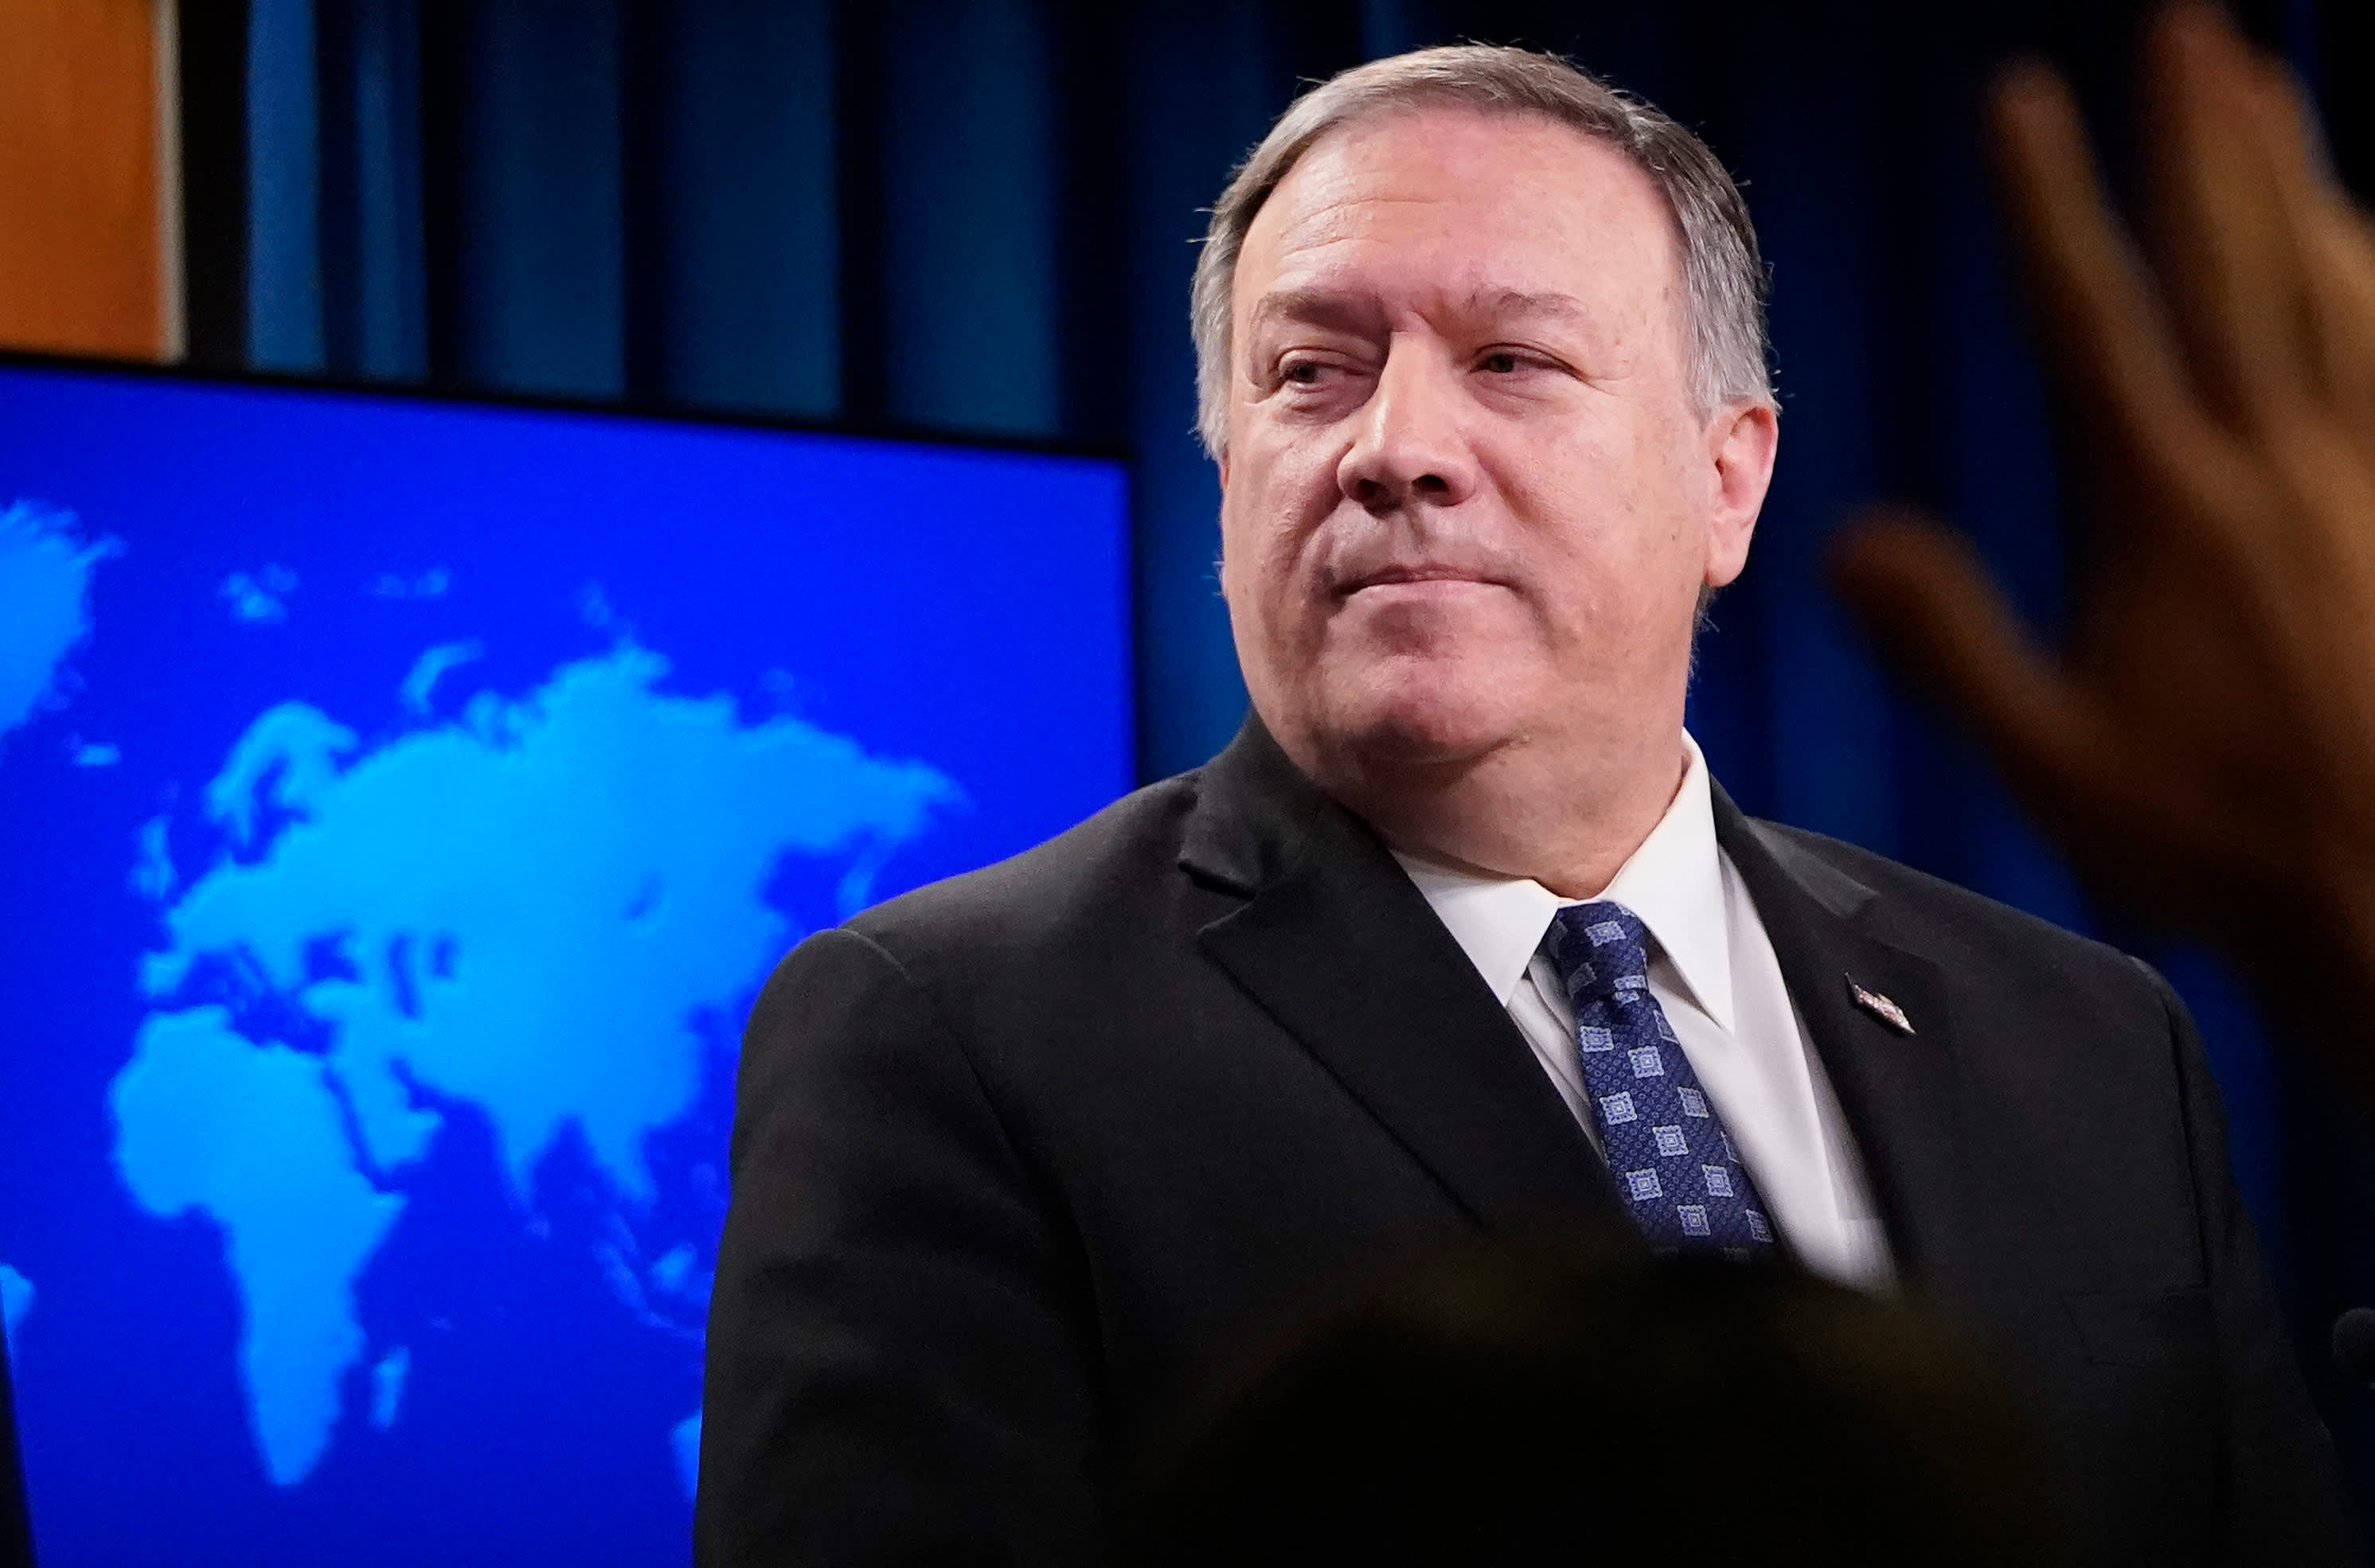 Pompeo is laying ‘landmines’ in US-China relations, says Kevin Rudd from Australia